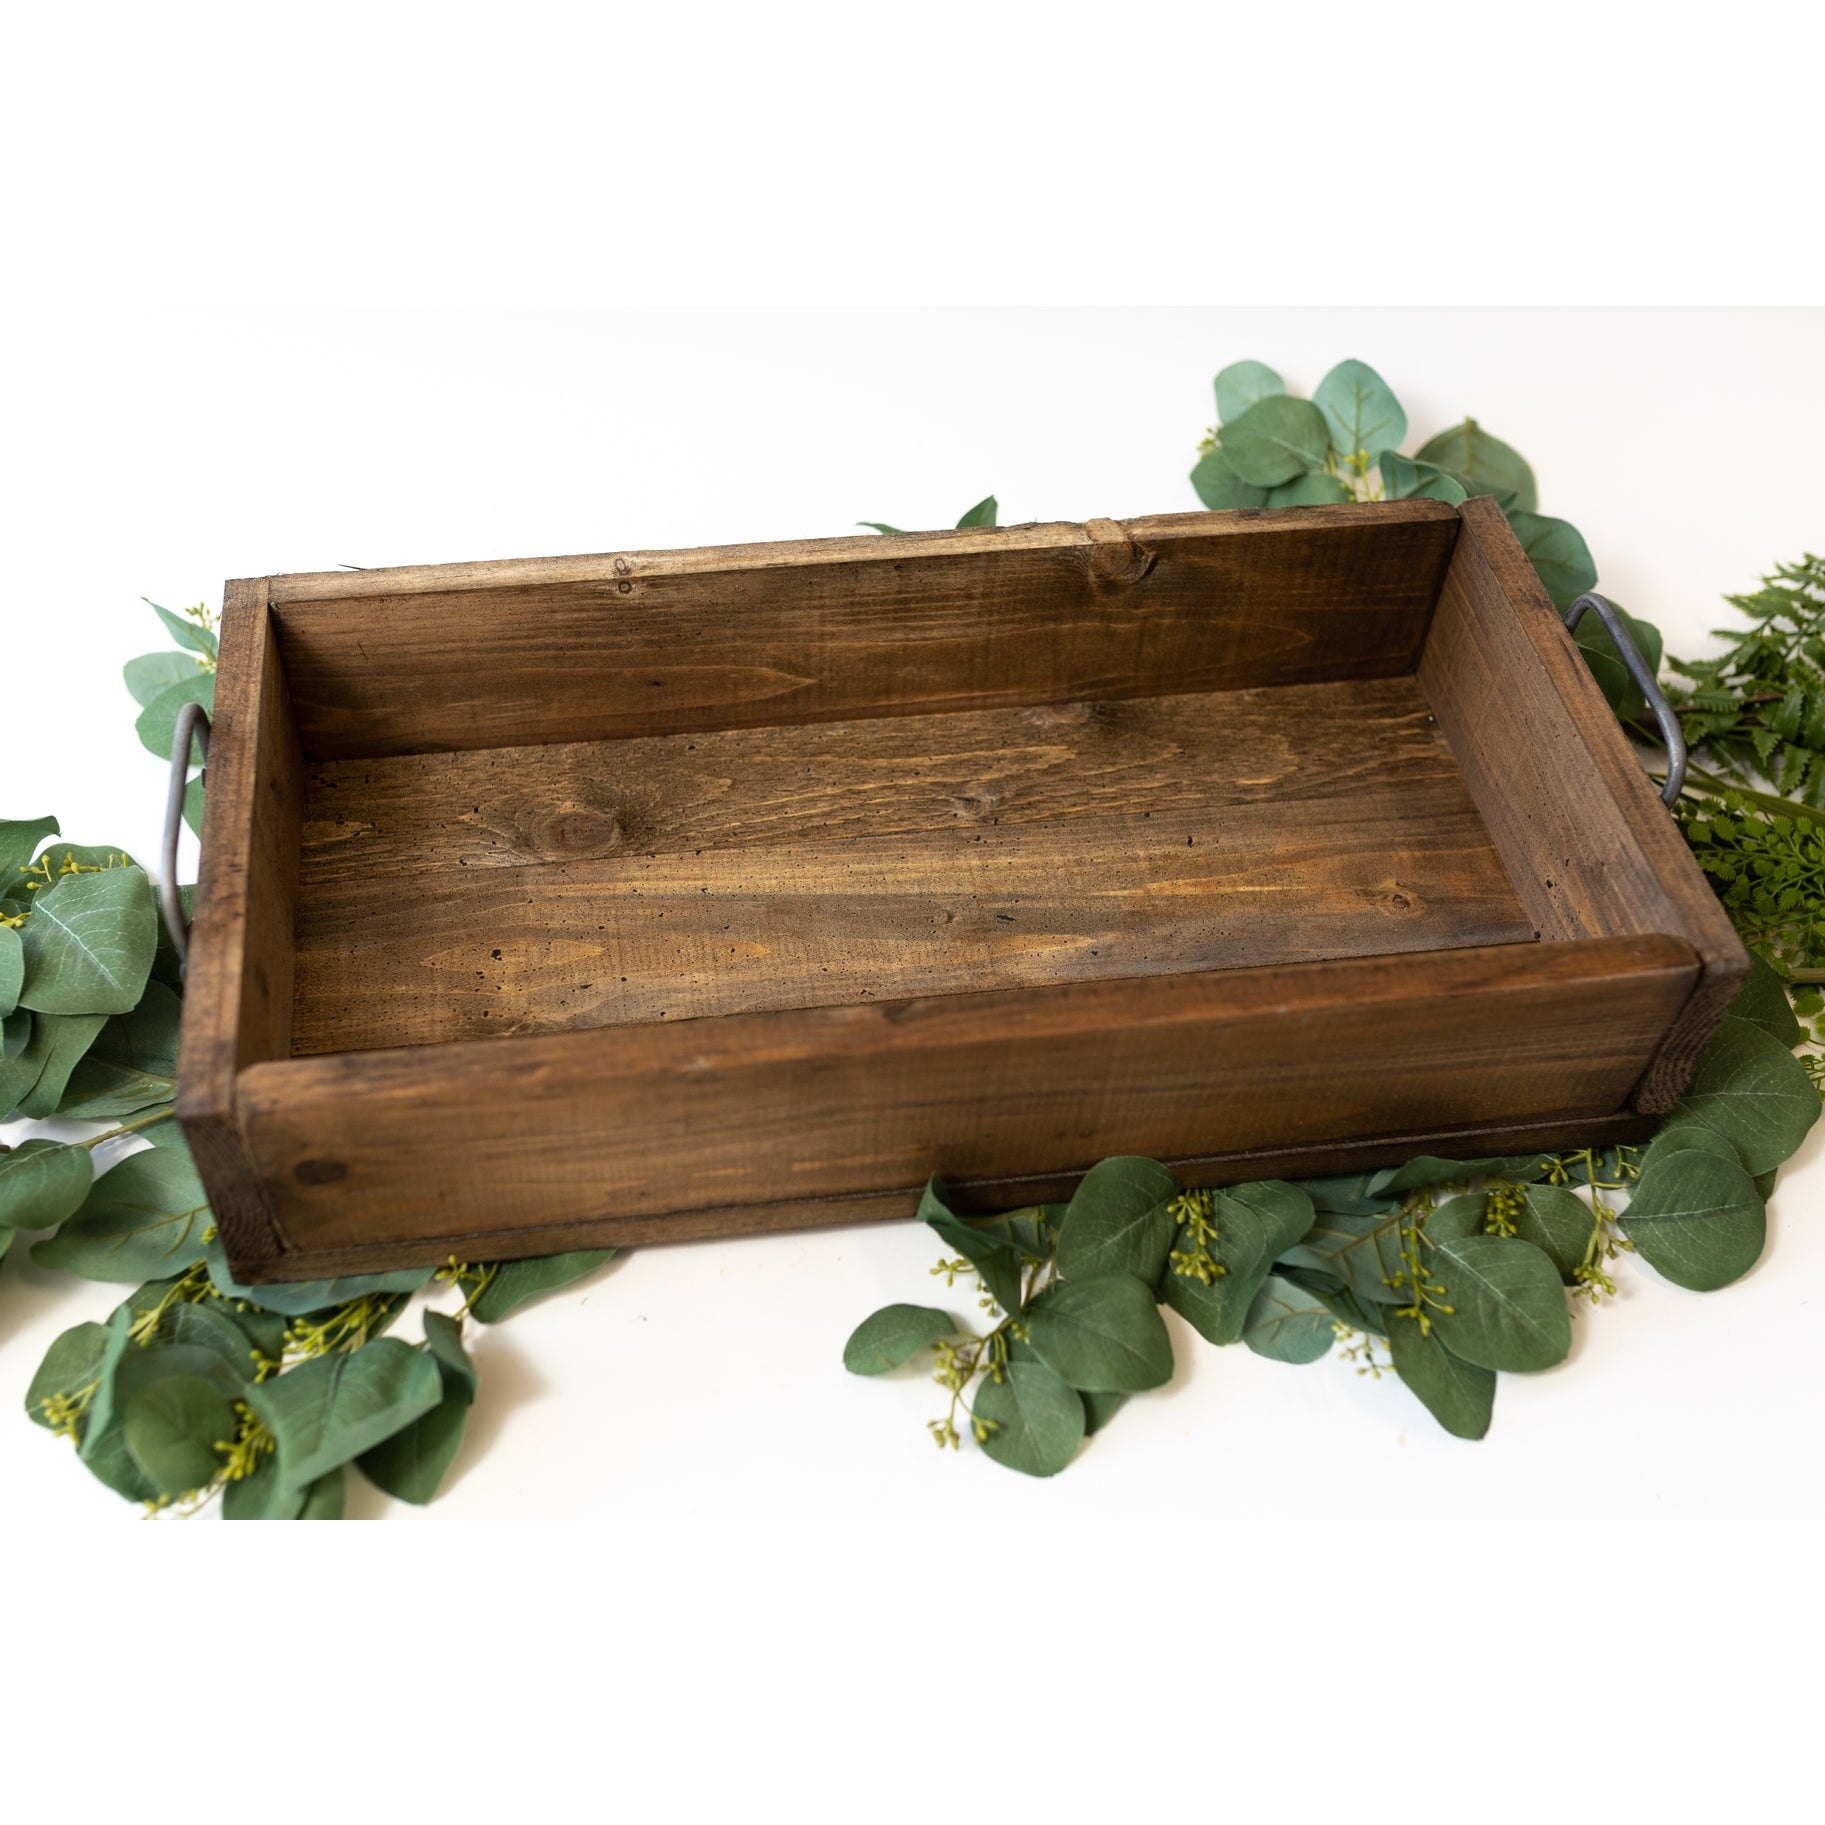 Handcrafted Wood Tray with Metal Handles-  2 Colors (22.25" x 10.25" x 4")